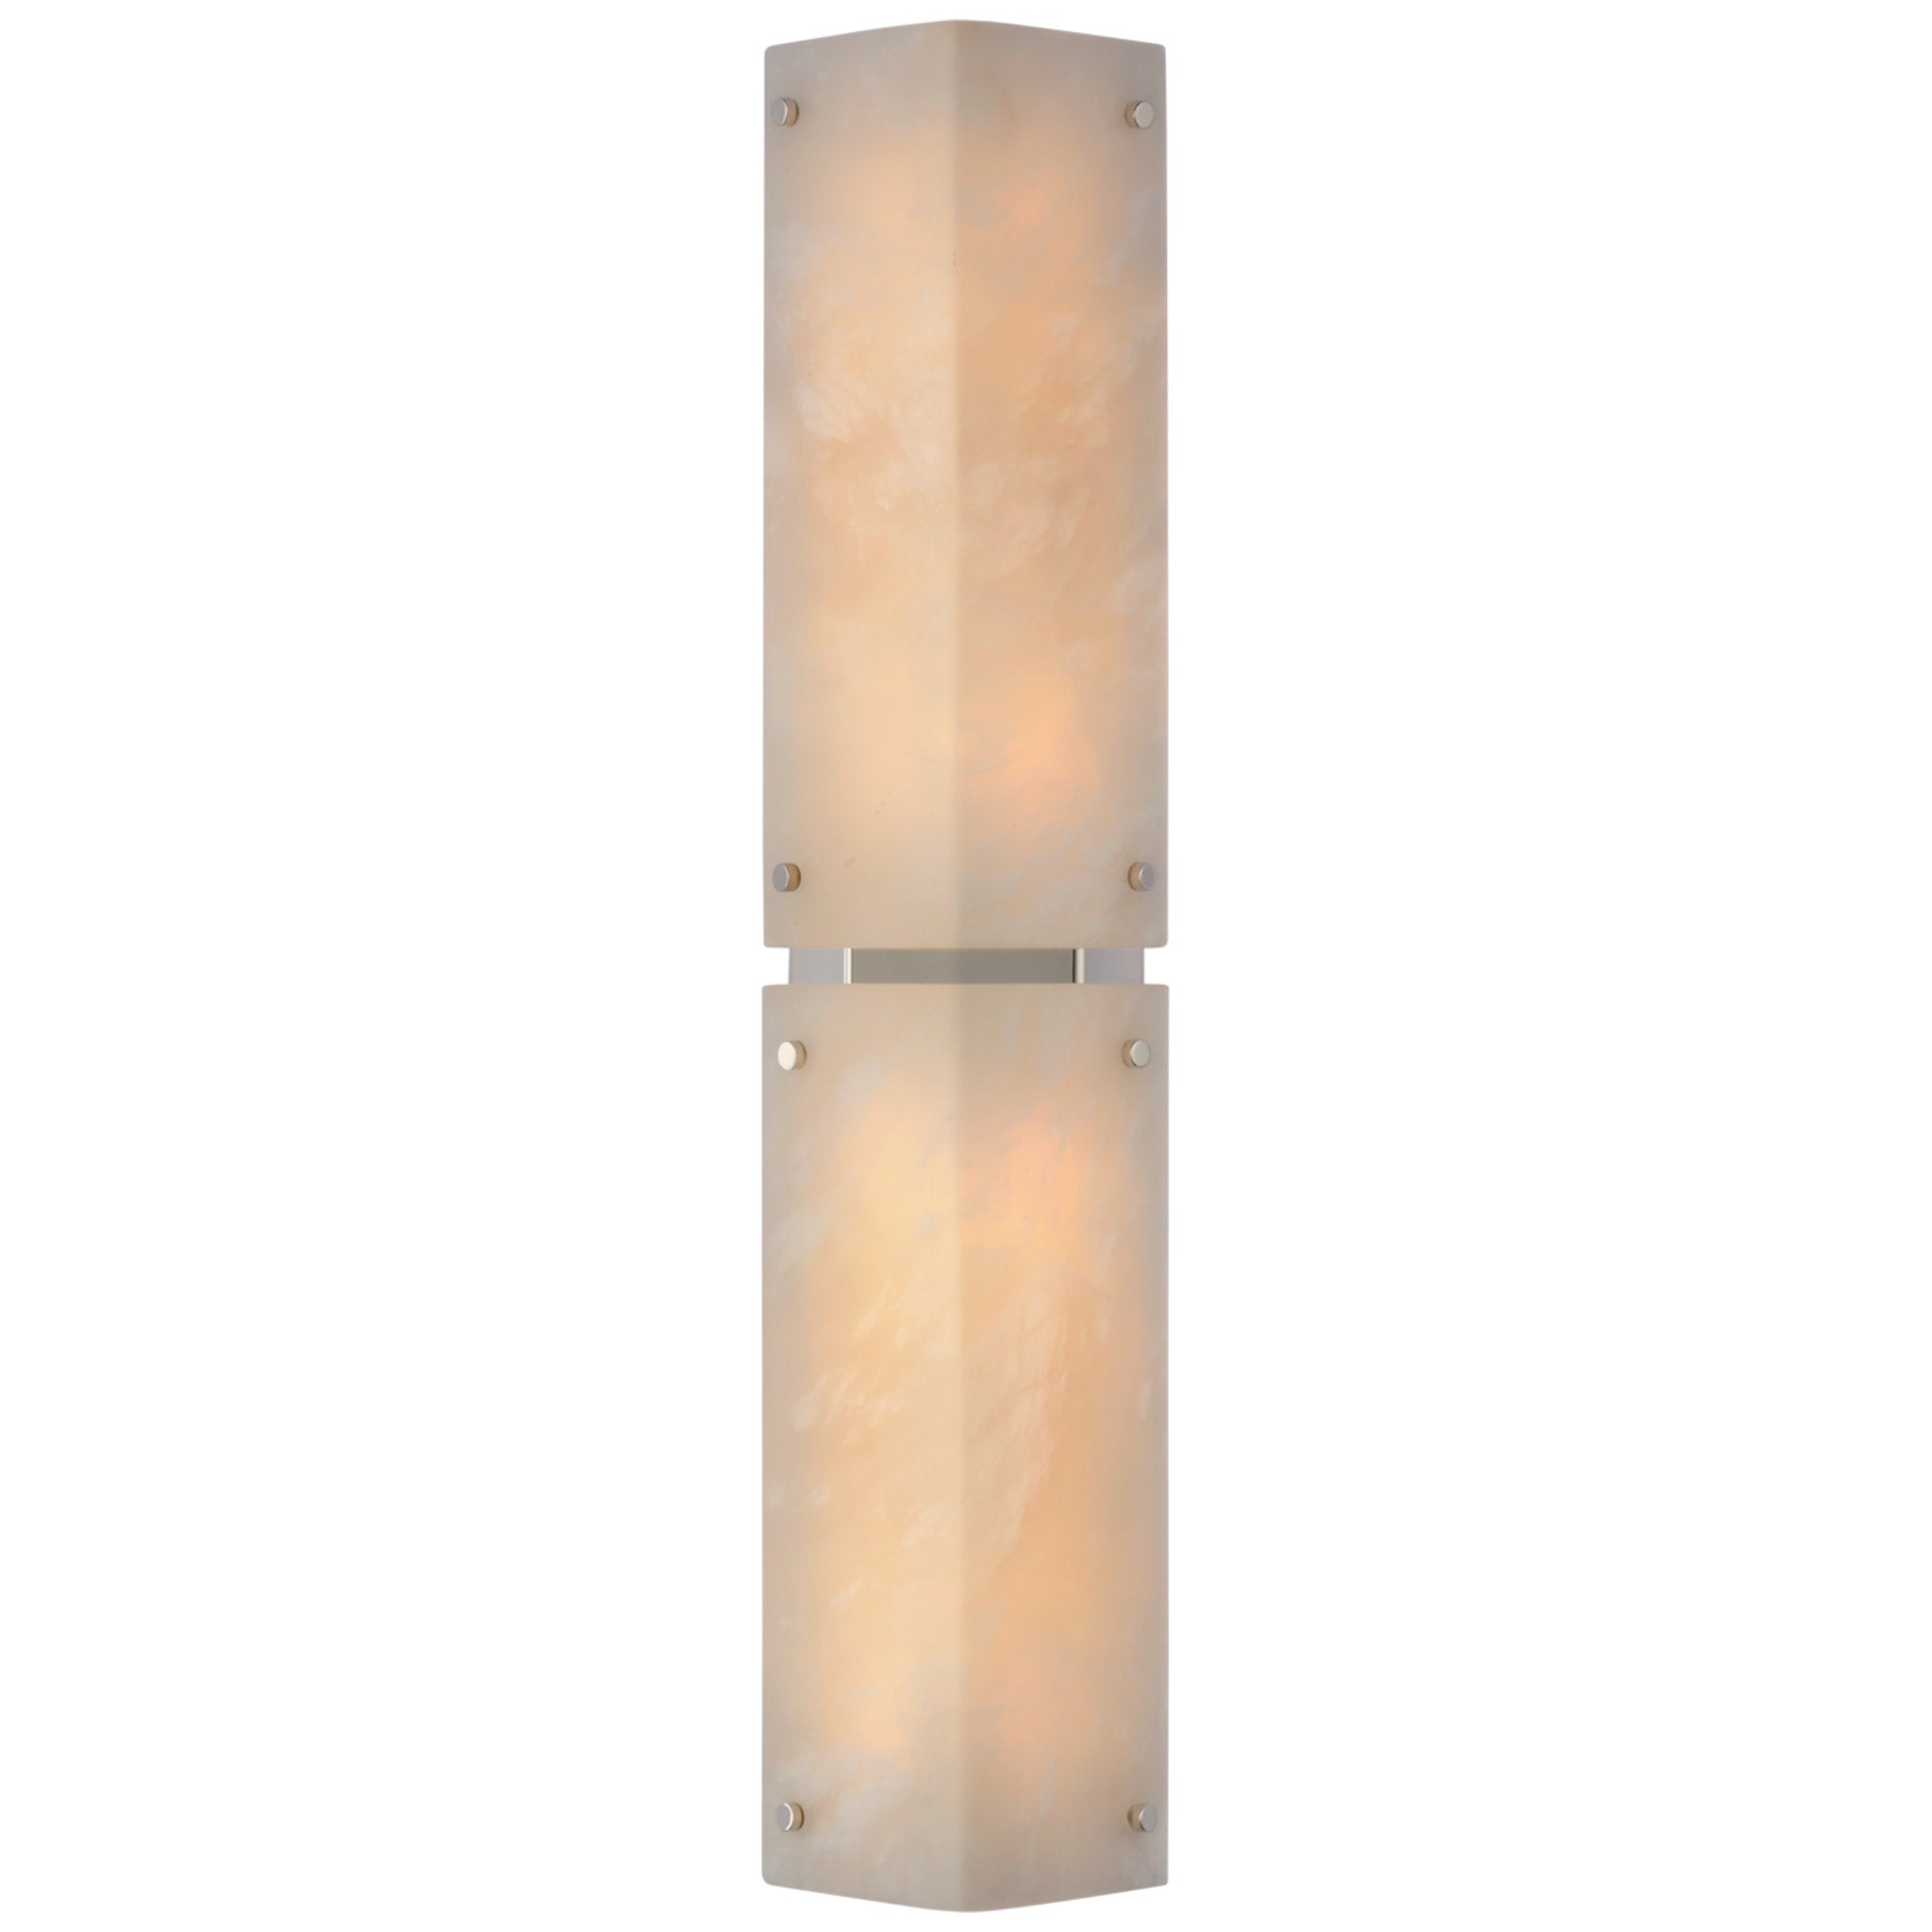 AERIN Clayton 25" Wall Sconce in Alabaster and Polished Nickel